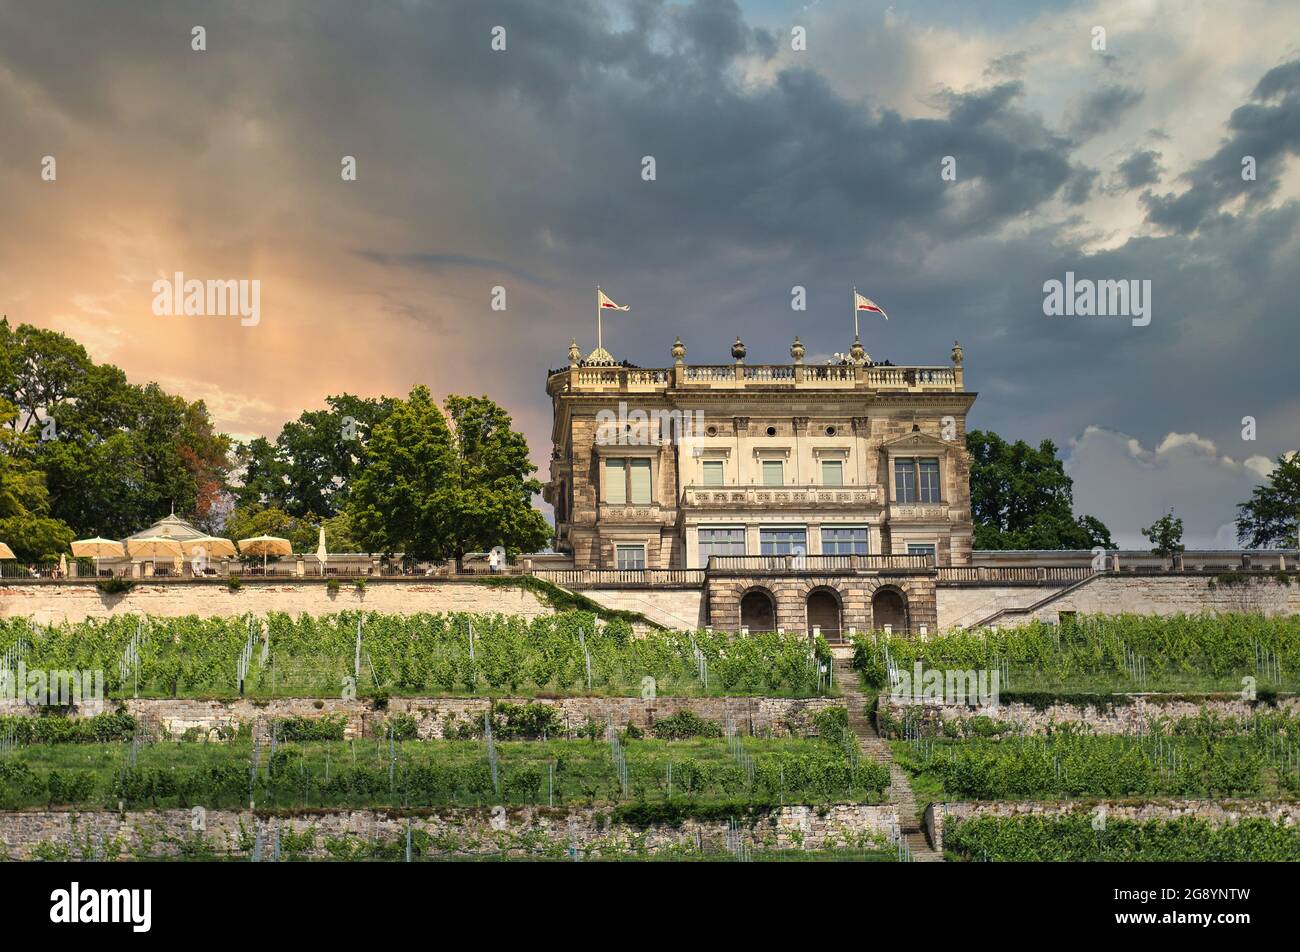 Palaces and fortresses on the river on the Elbe in Dresden, Germany. Stock Photo